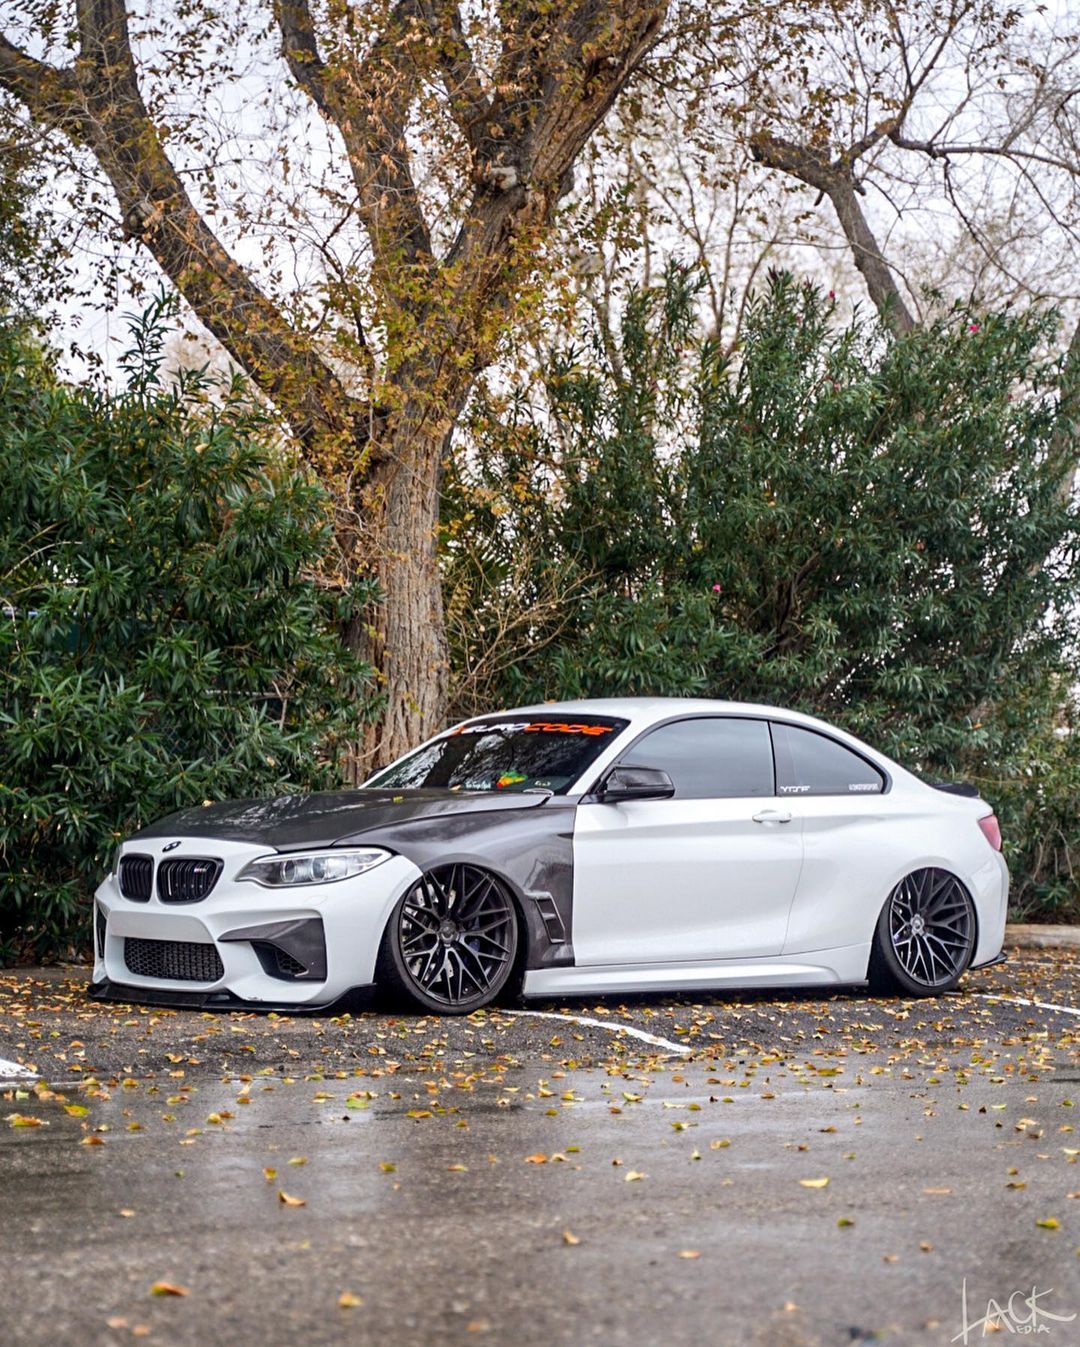 Check our price and buy CMST Carbon Fiber Body Kit set for BMW 2 Series F22!